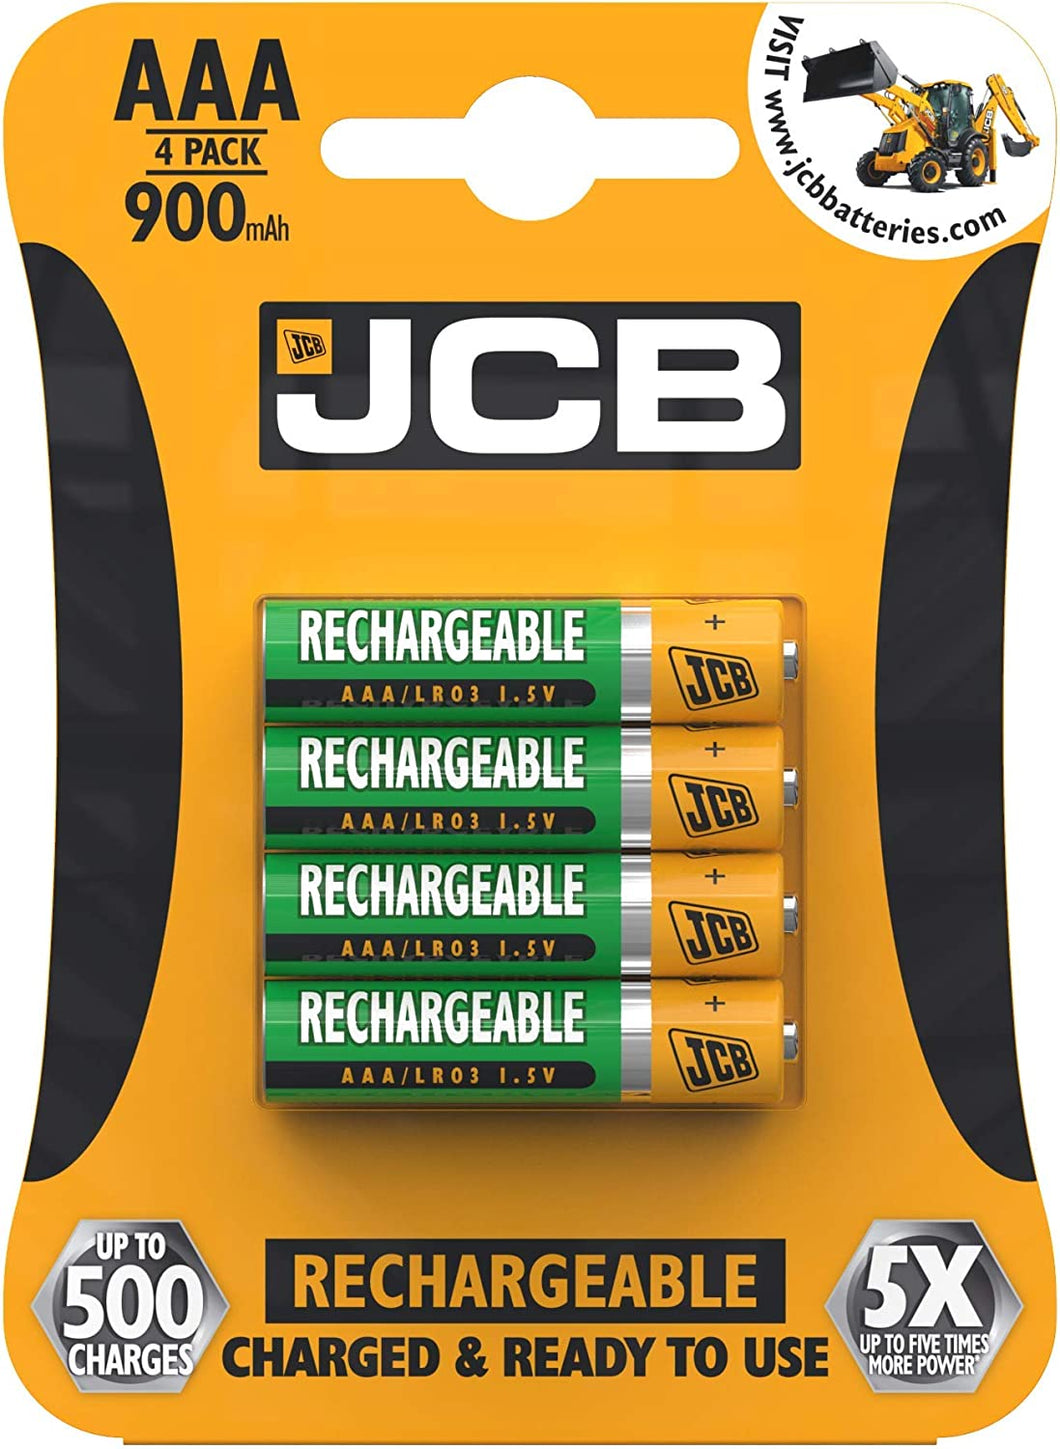 JCB Batteries AAA Rechargeable